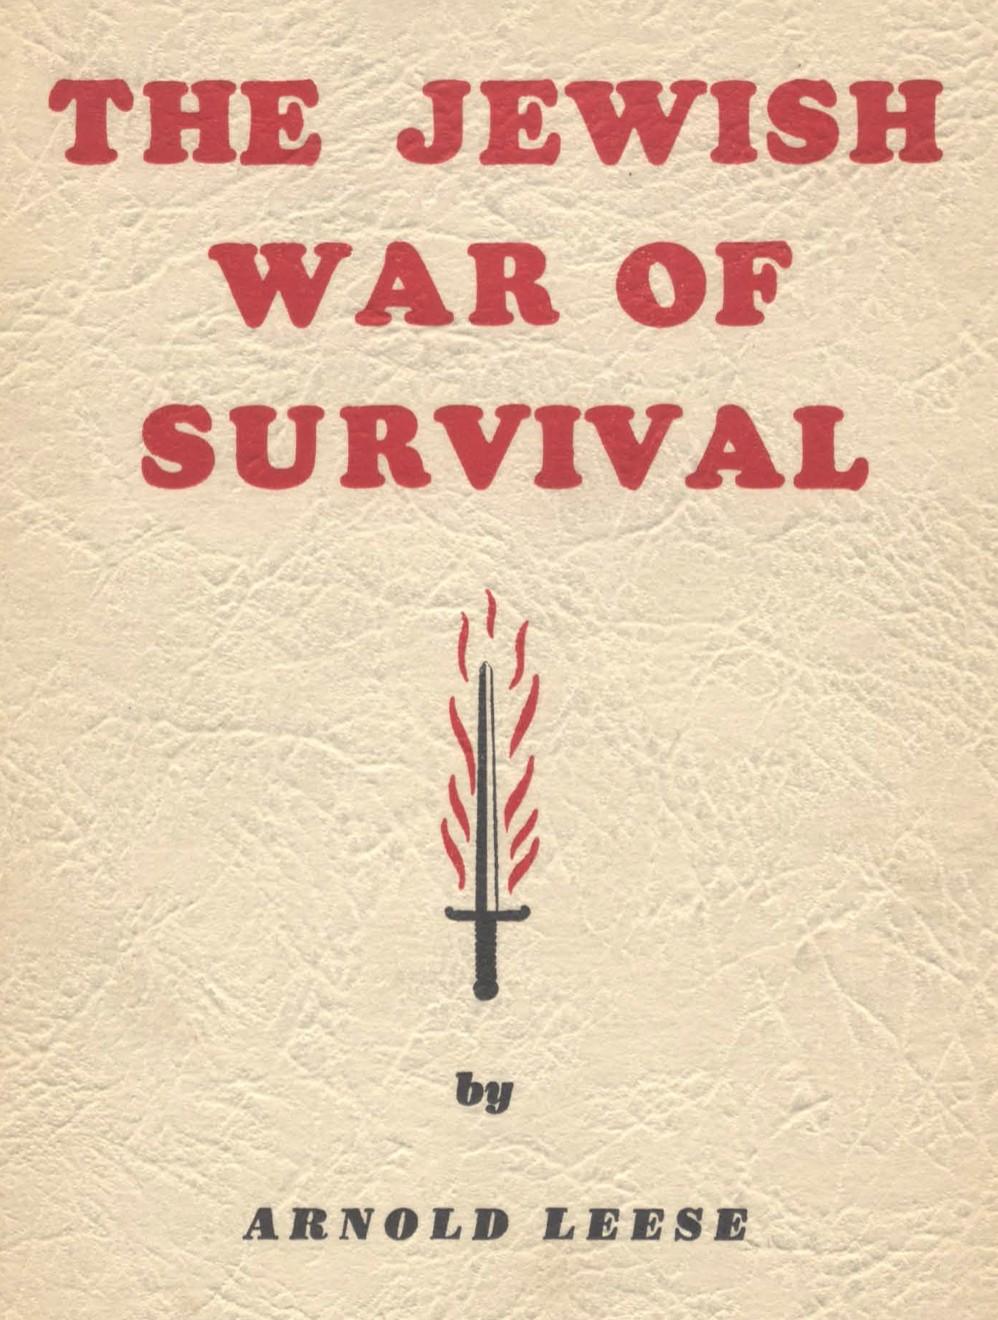 The Jewish War of Survival (1947) by Arnold Spencer Leese